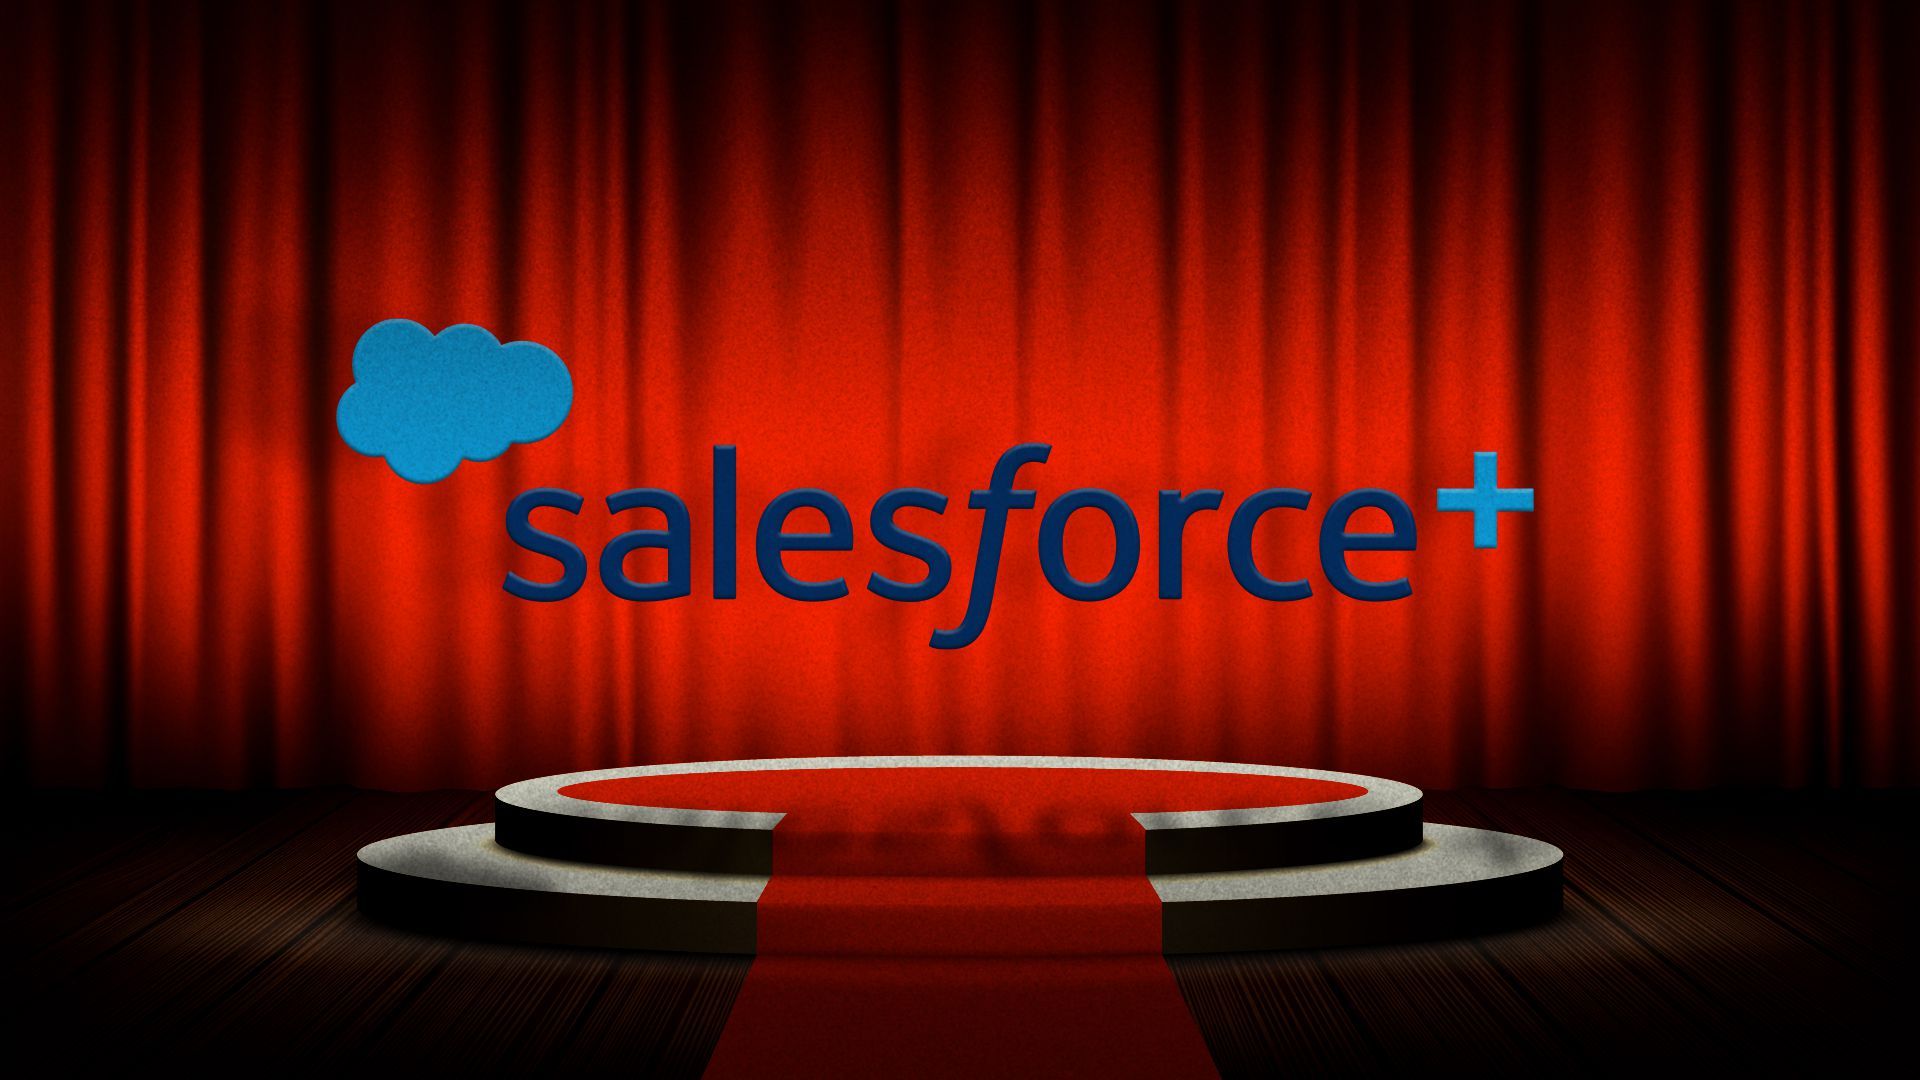 Salesforce+ logo on a theater stage.